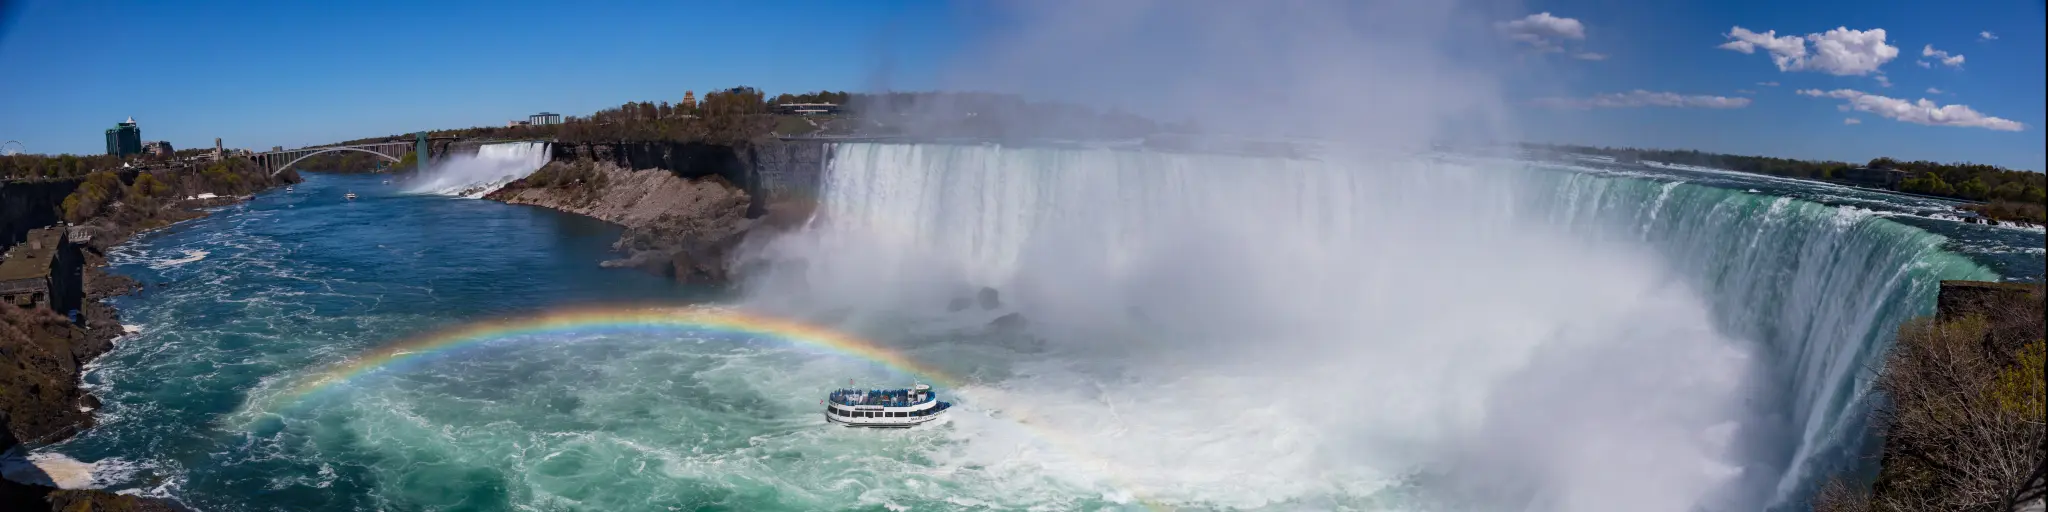 A panoramic view of Niagara Falls with a boat near the mist from the water that creates a rainbow.